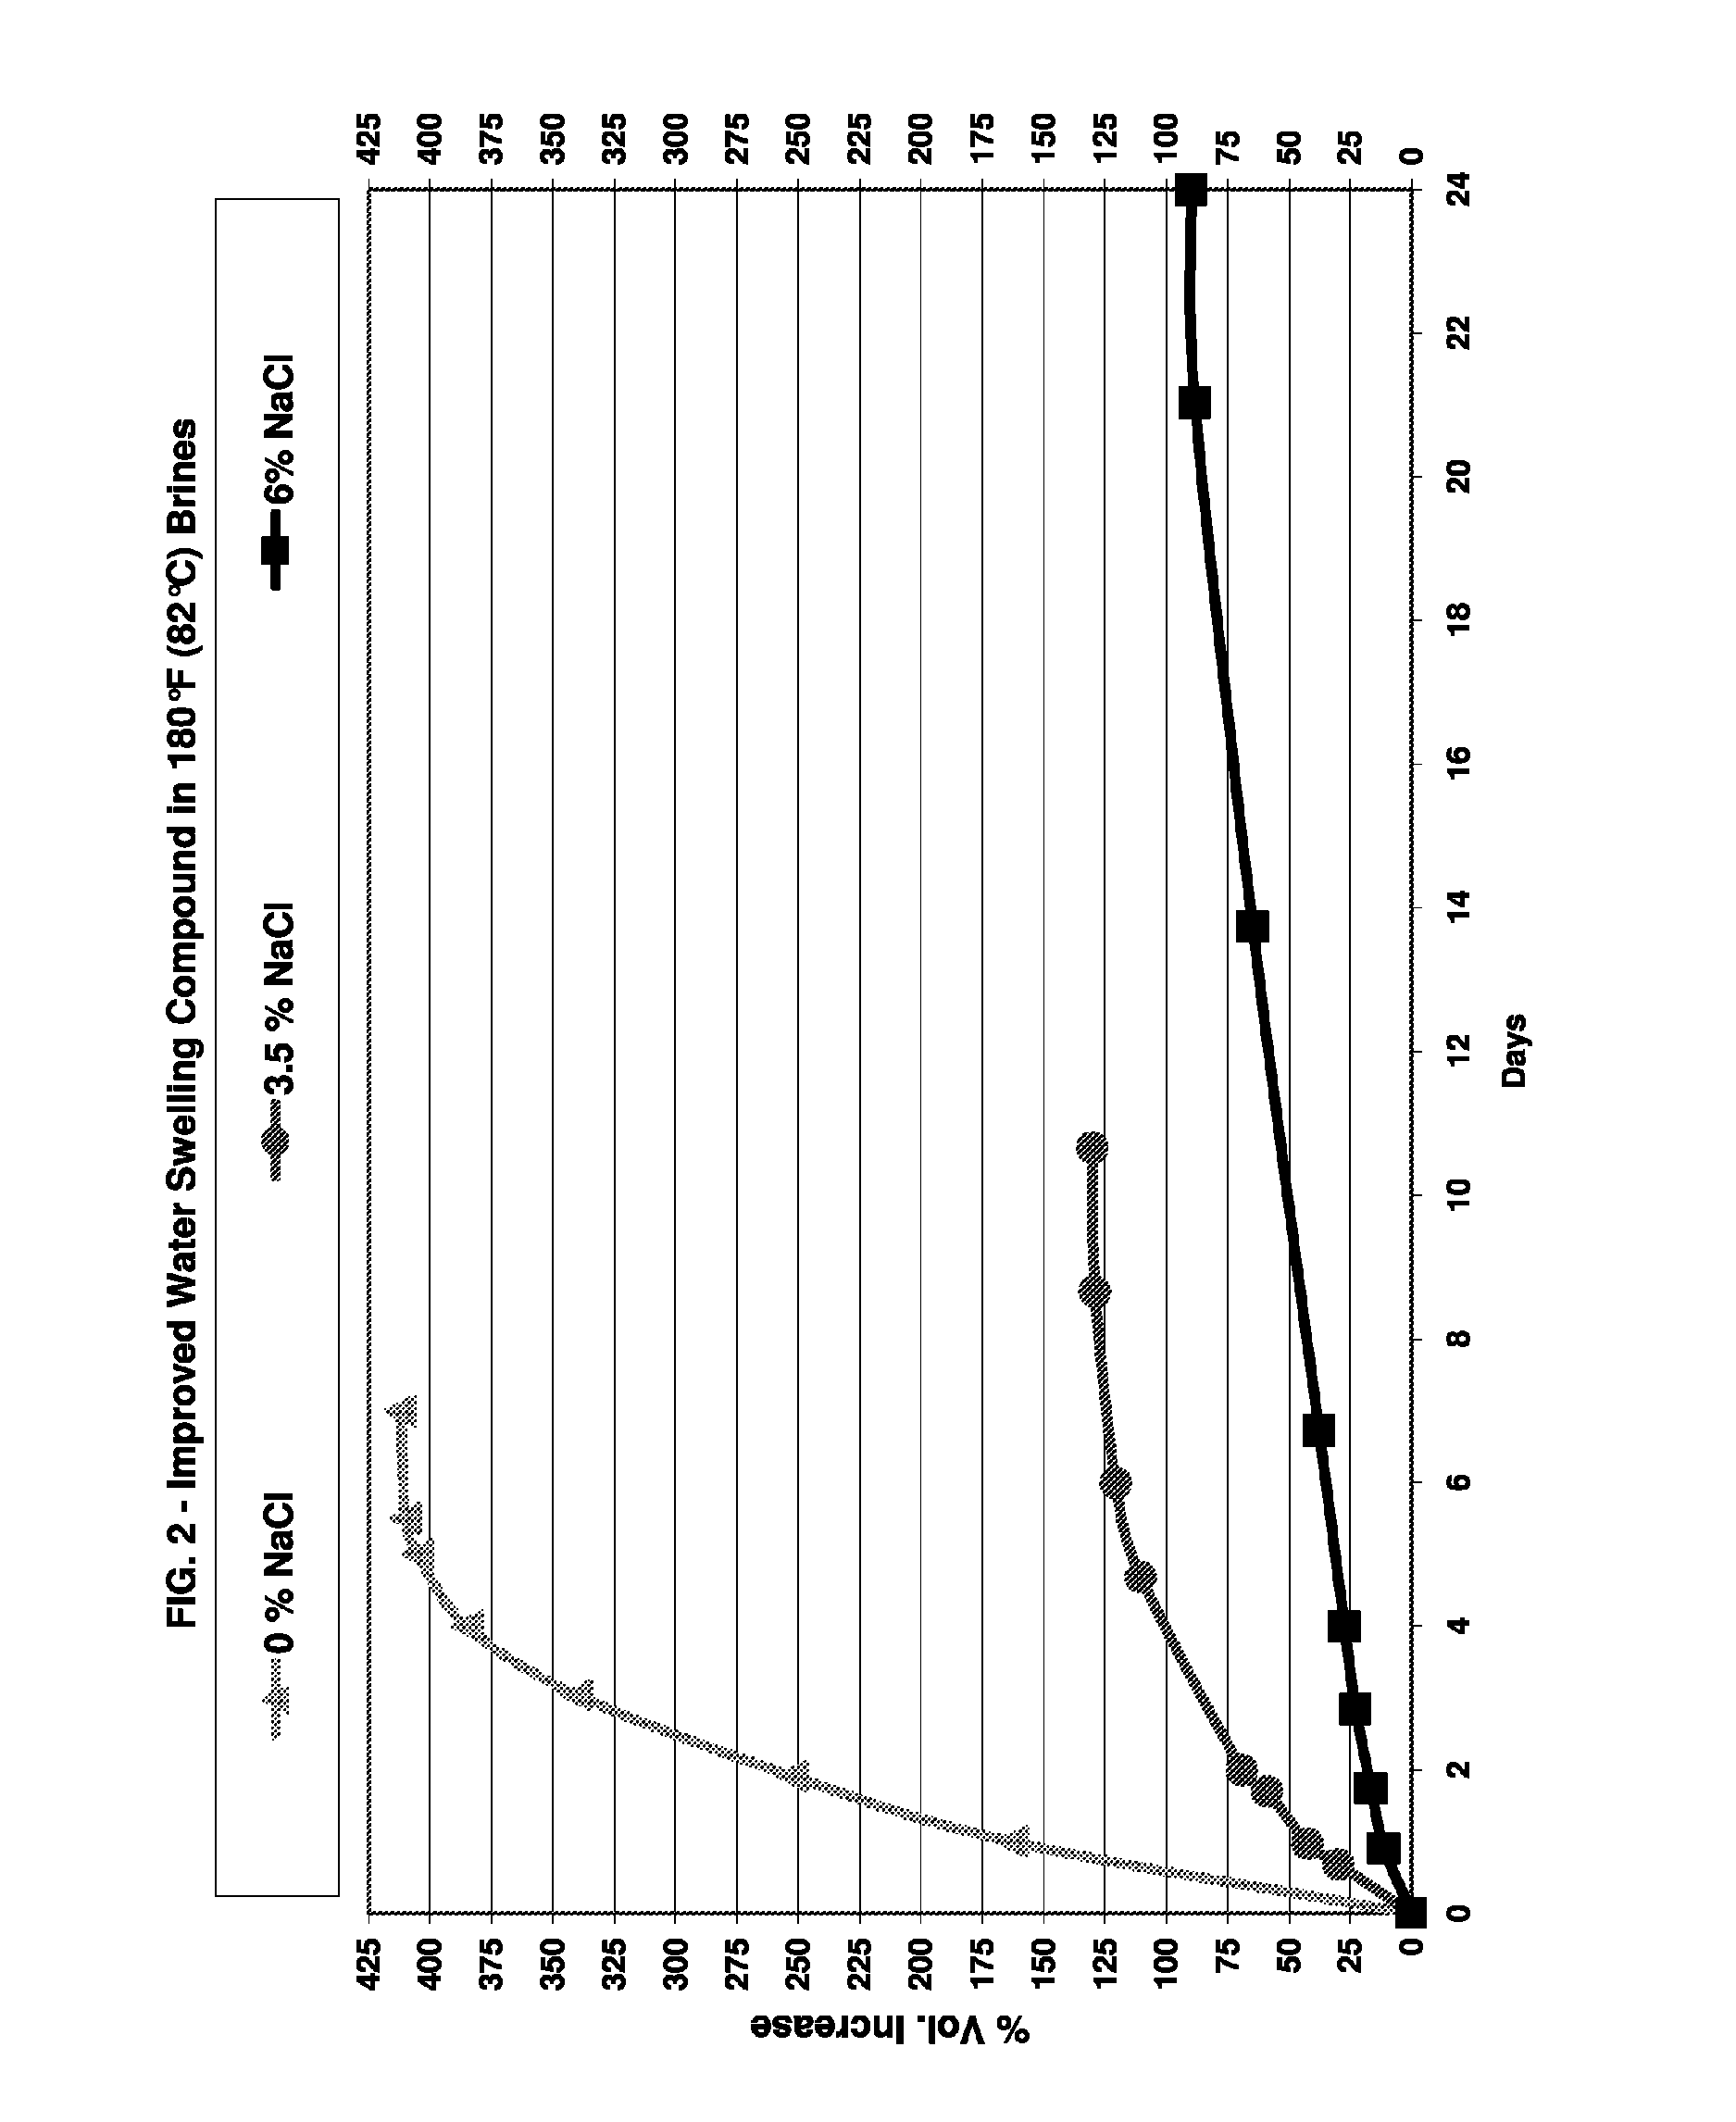 Water swelling rubber compound for use in reactive packers and other downhole tools